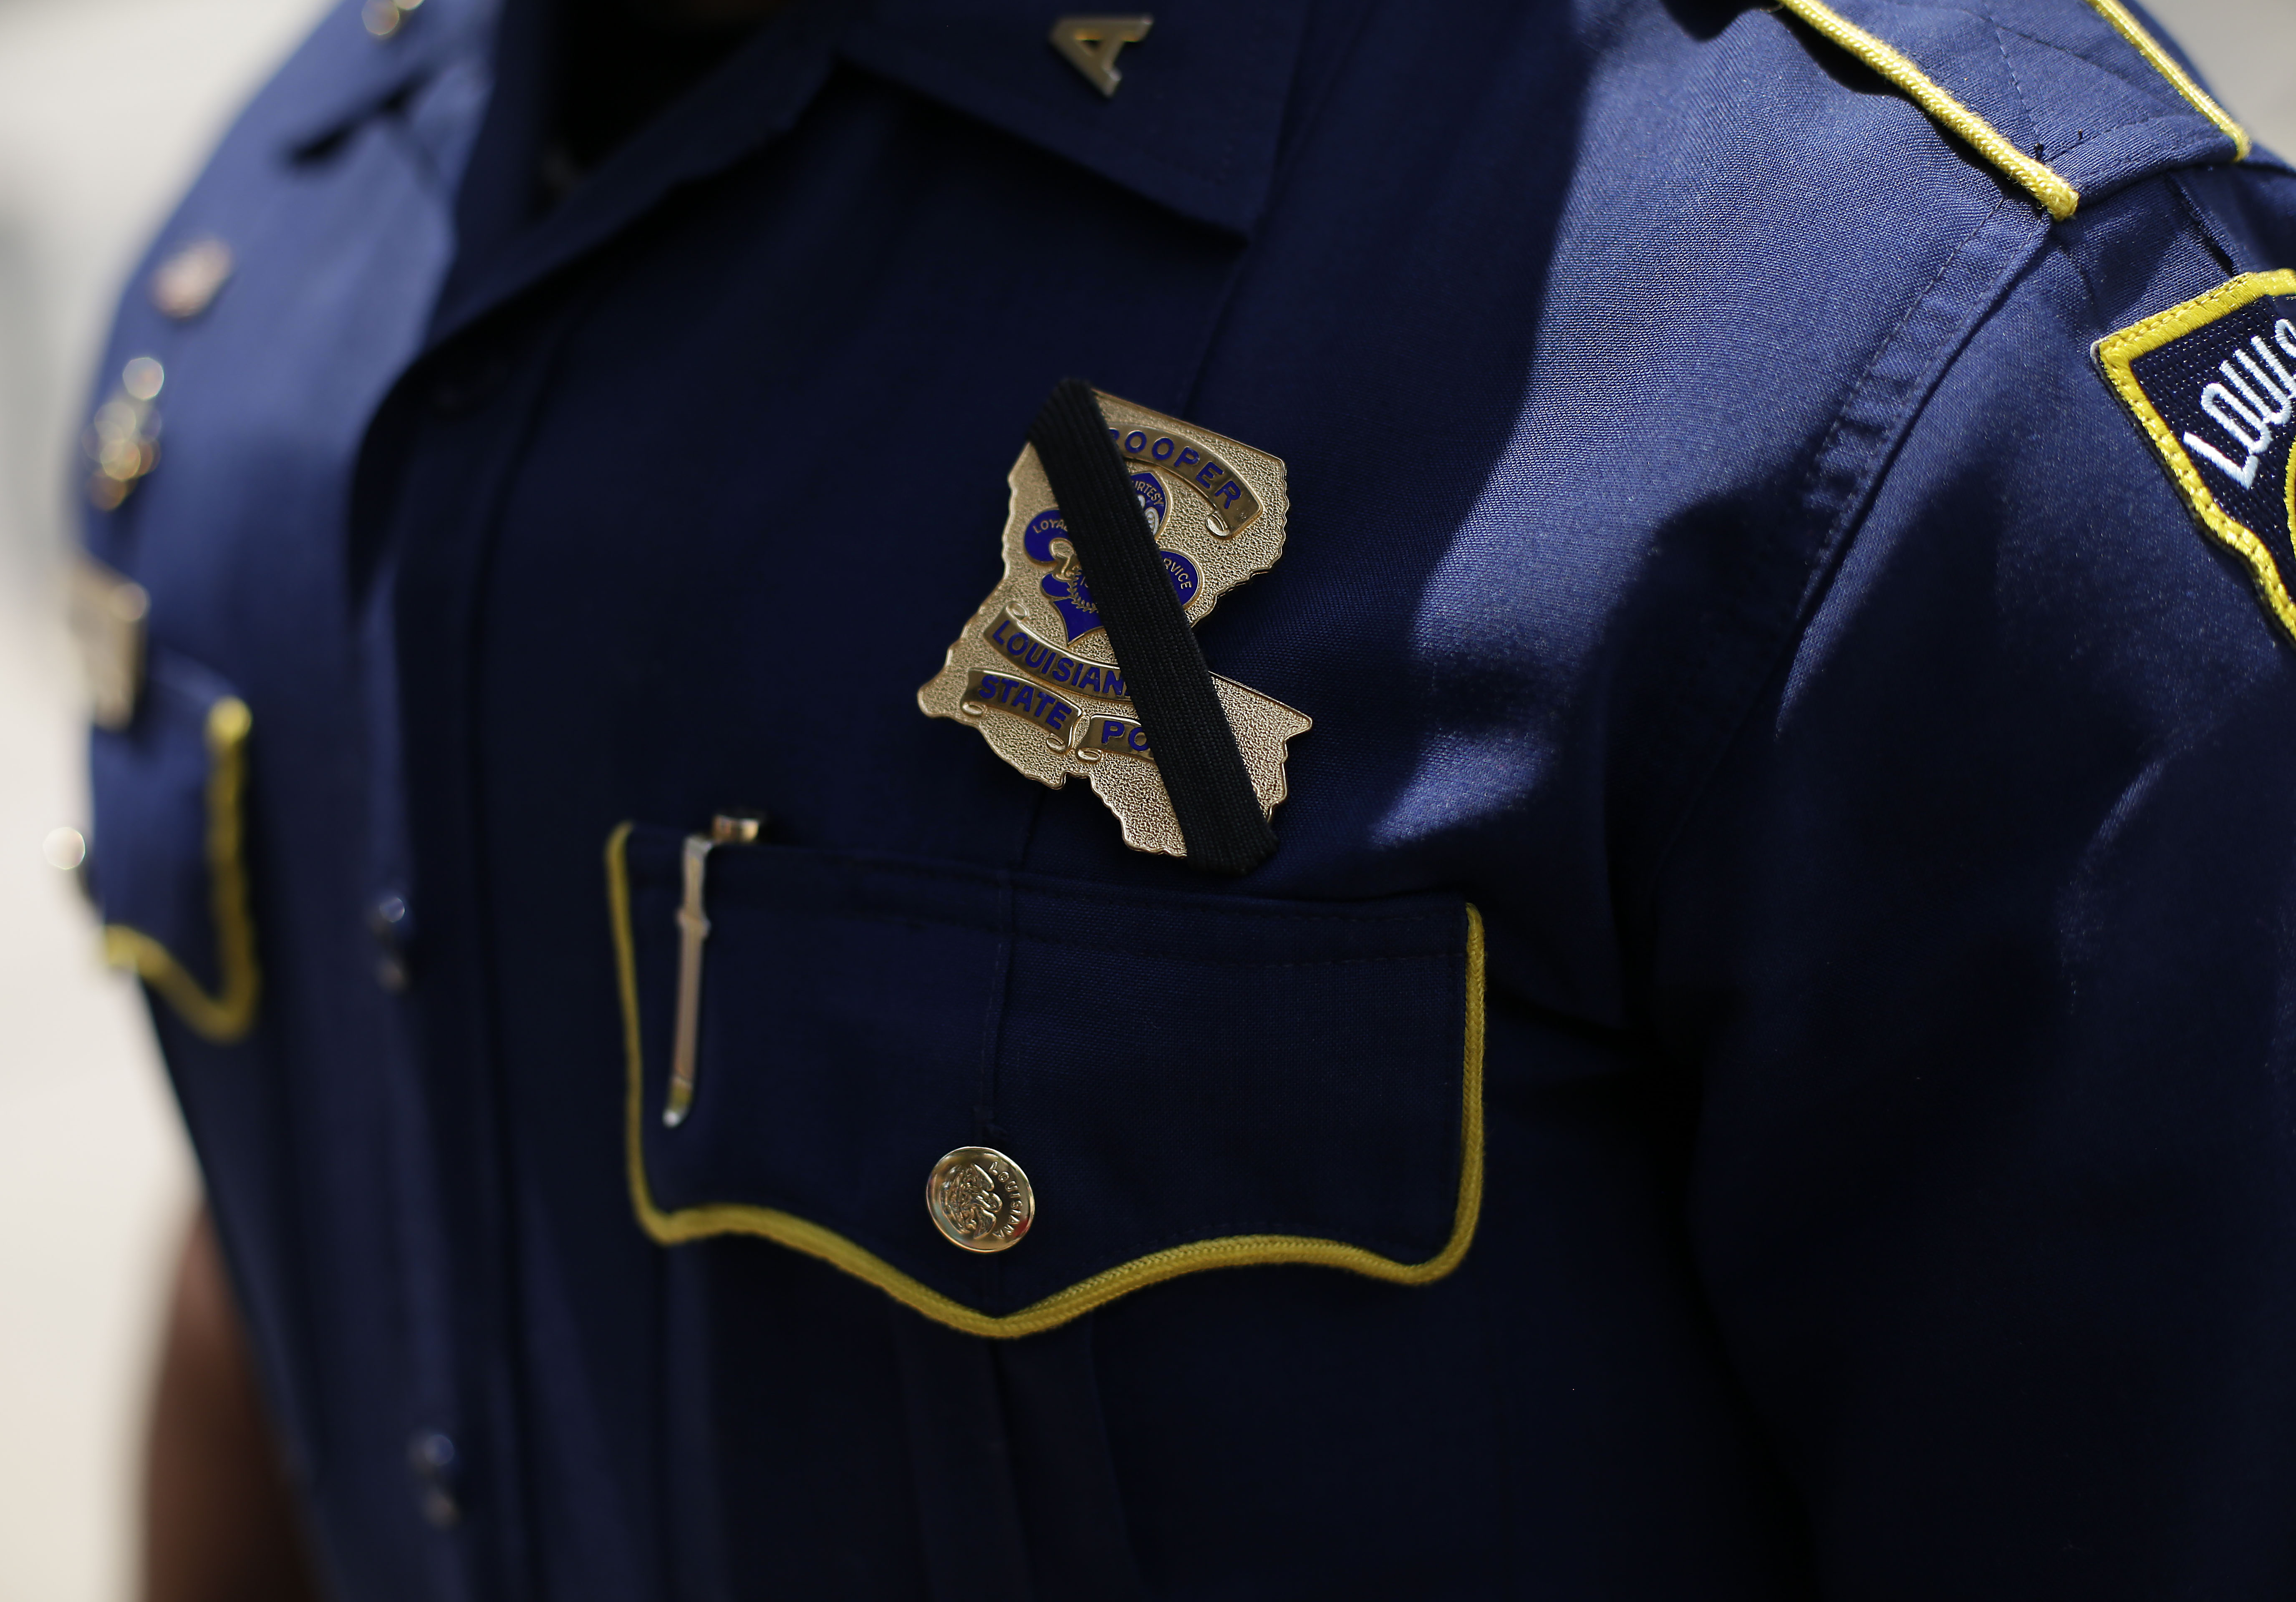 A black band is displayed around Louisiana State Police Officer Bryan Lee badge during a prayer vigil for Baton Rouge Police Officers Montrell Jackson, Matthew Gerald and East Baton Rouge Parish Sheriff Deputy Brad Garafola at the North Boulevard Town Square July 21, 2016 in Baton Rouge, Louisiana.